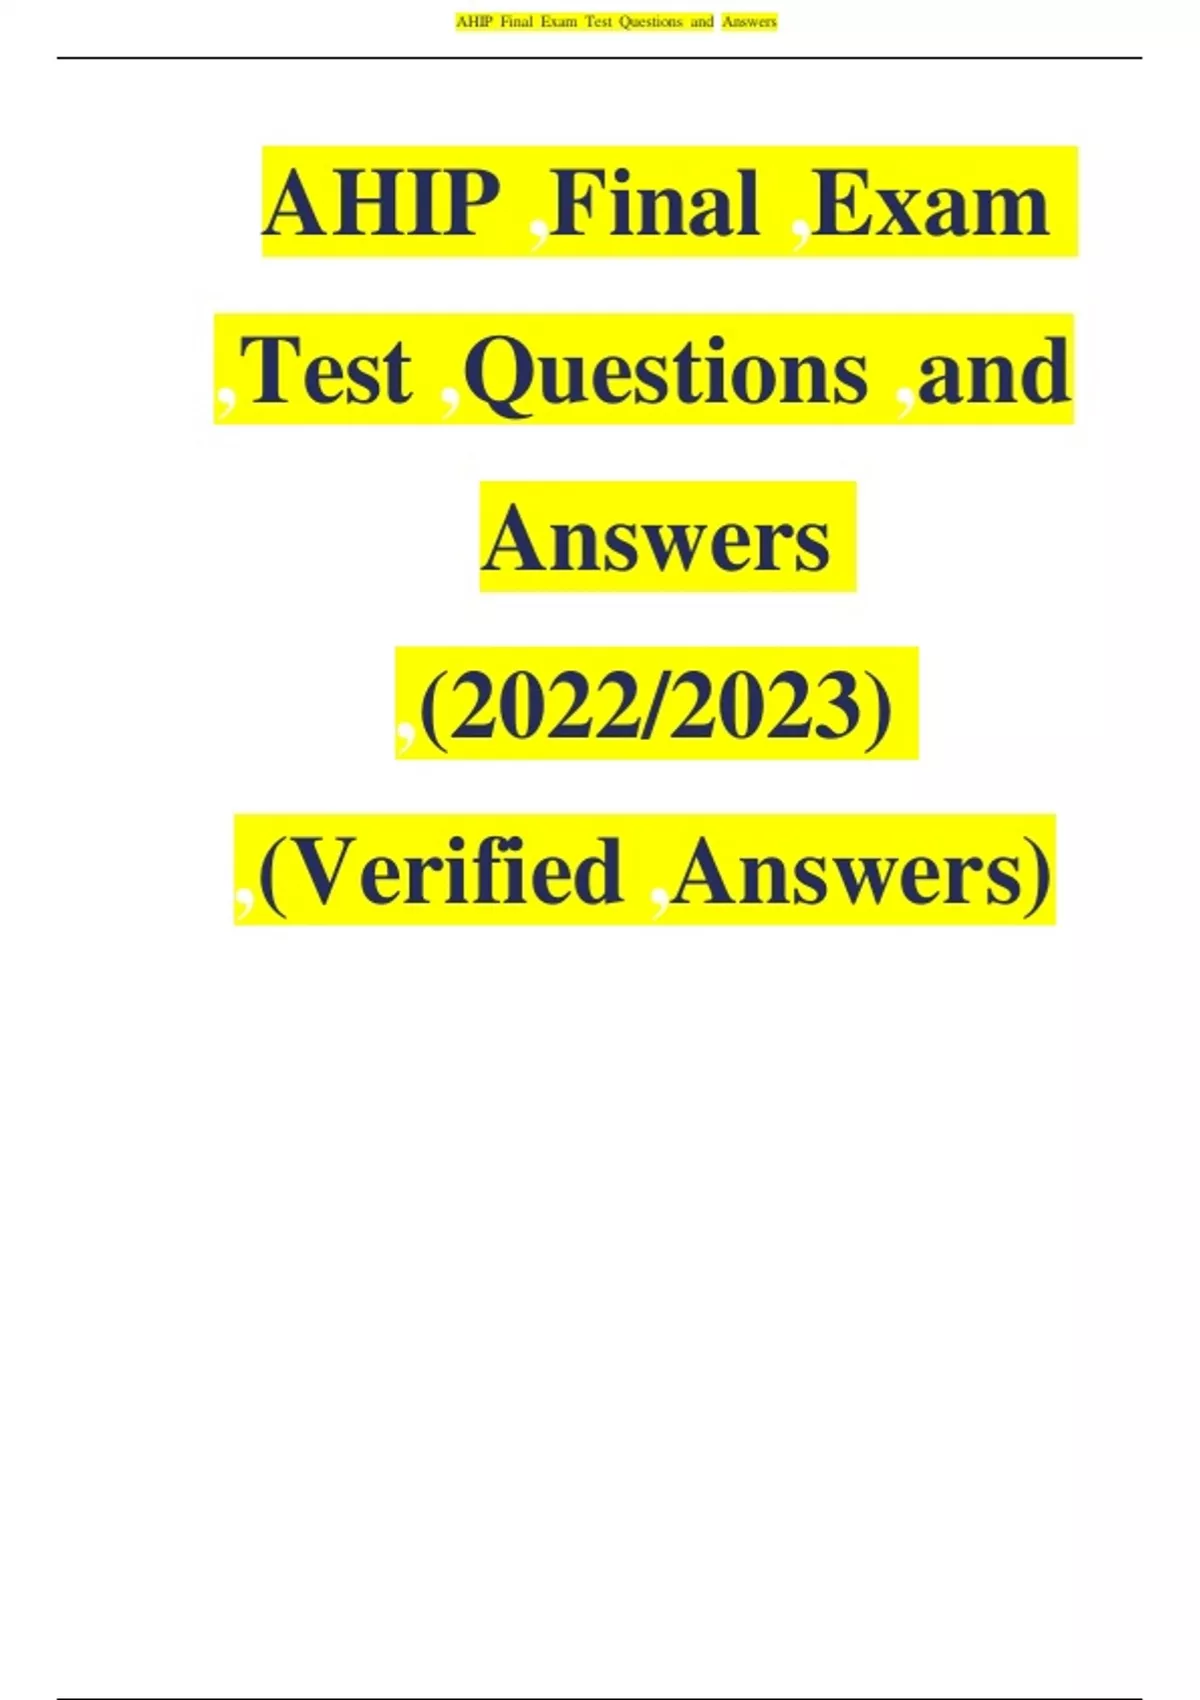 ahip-final-exam-test-questions-and-answers-2022-2023